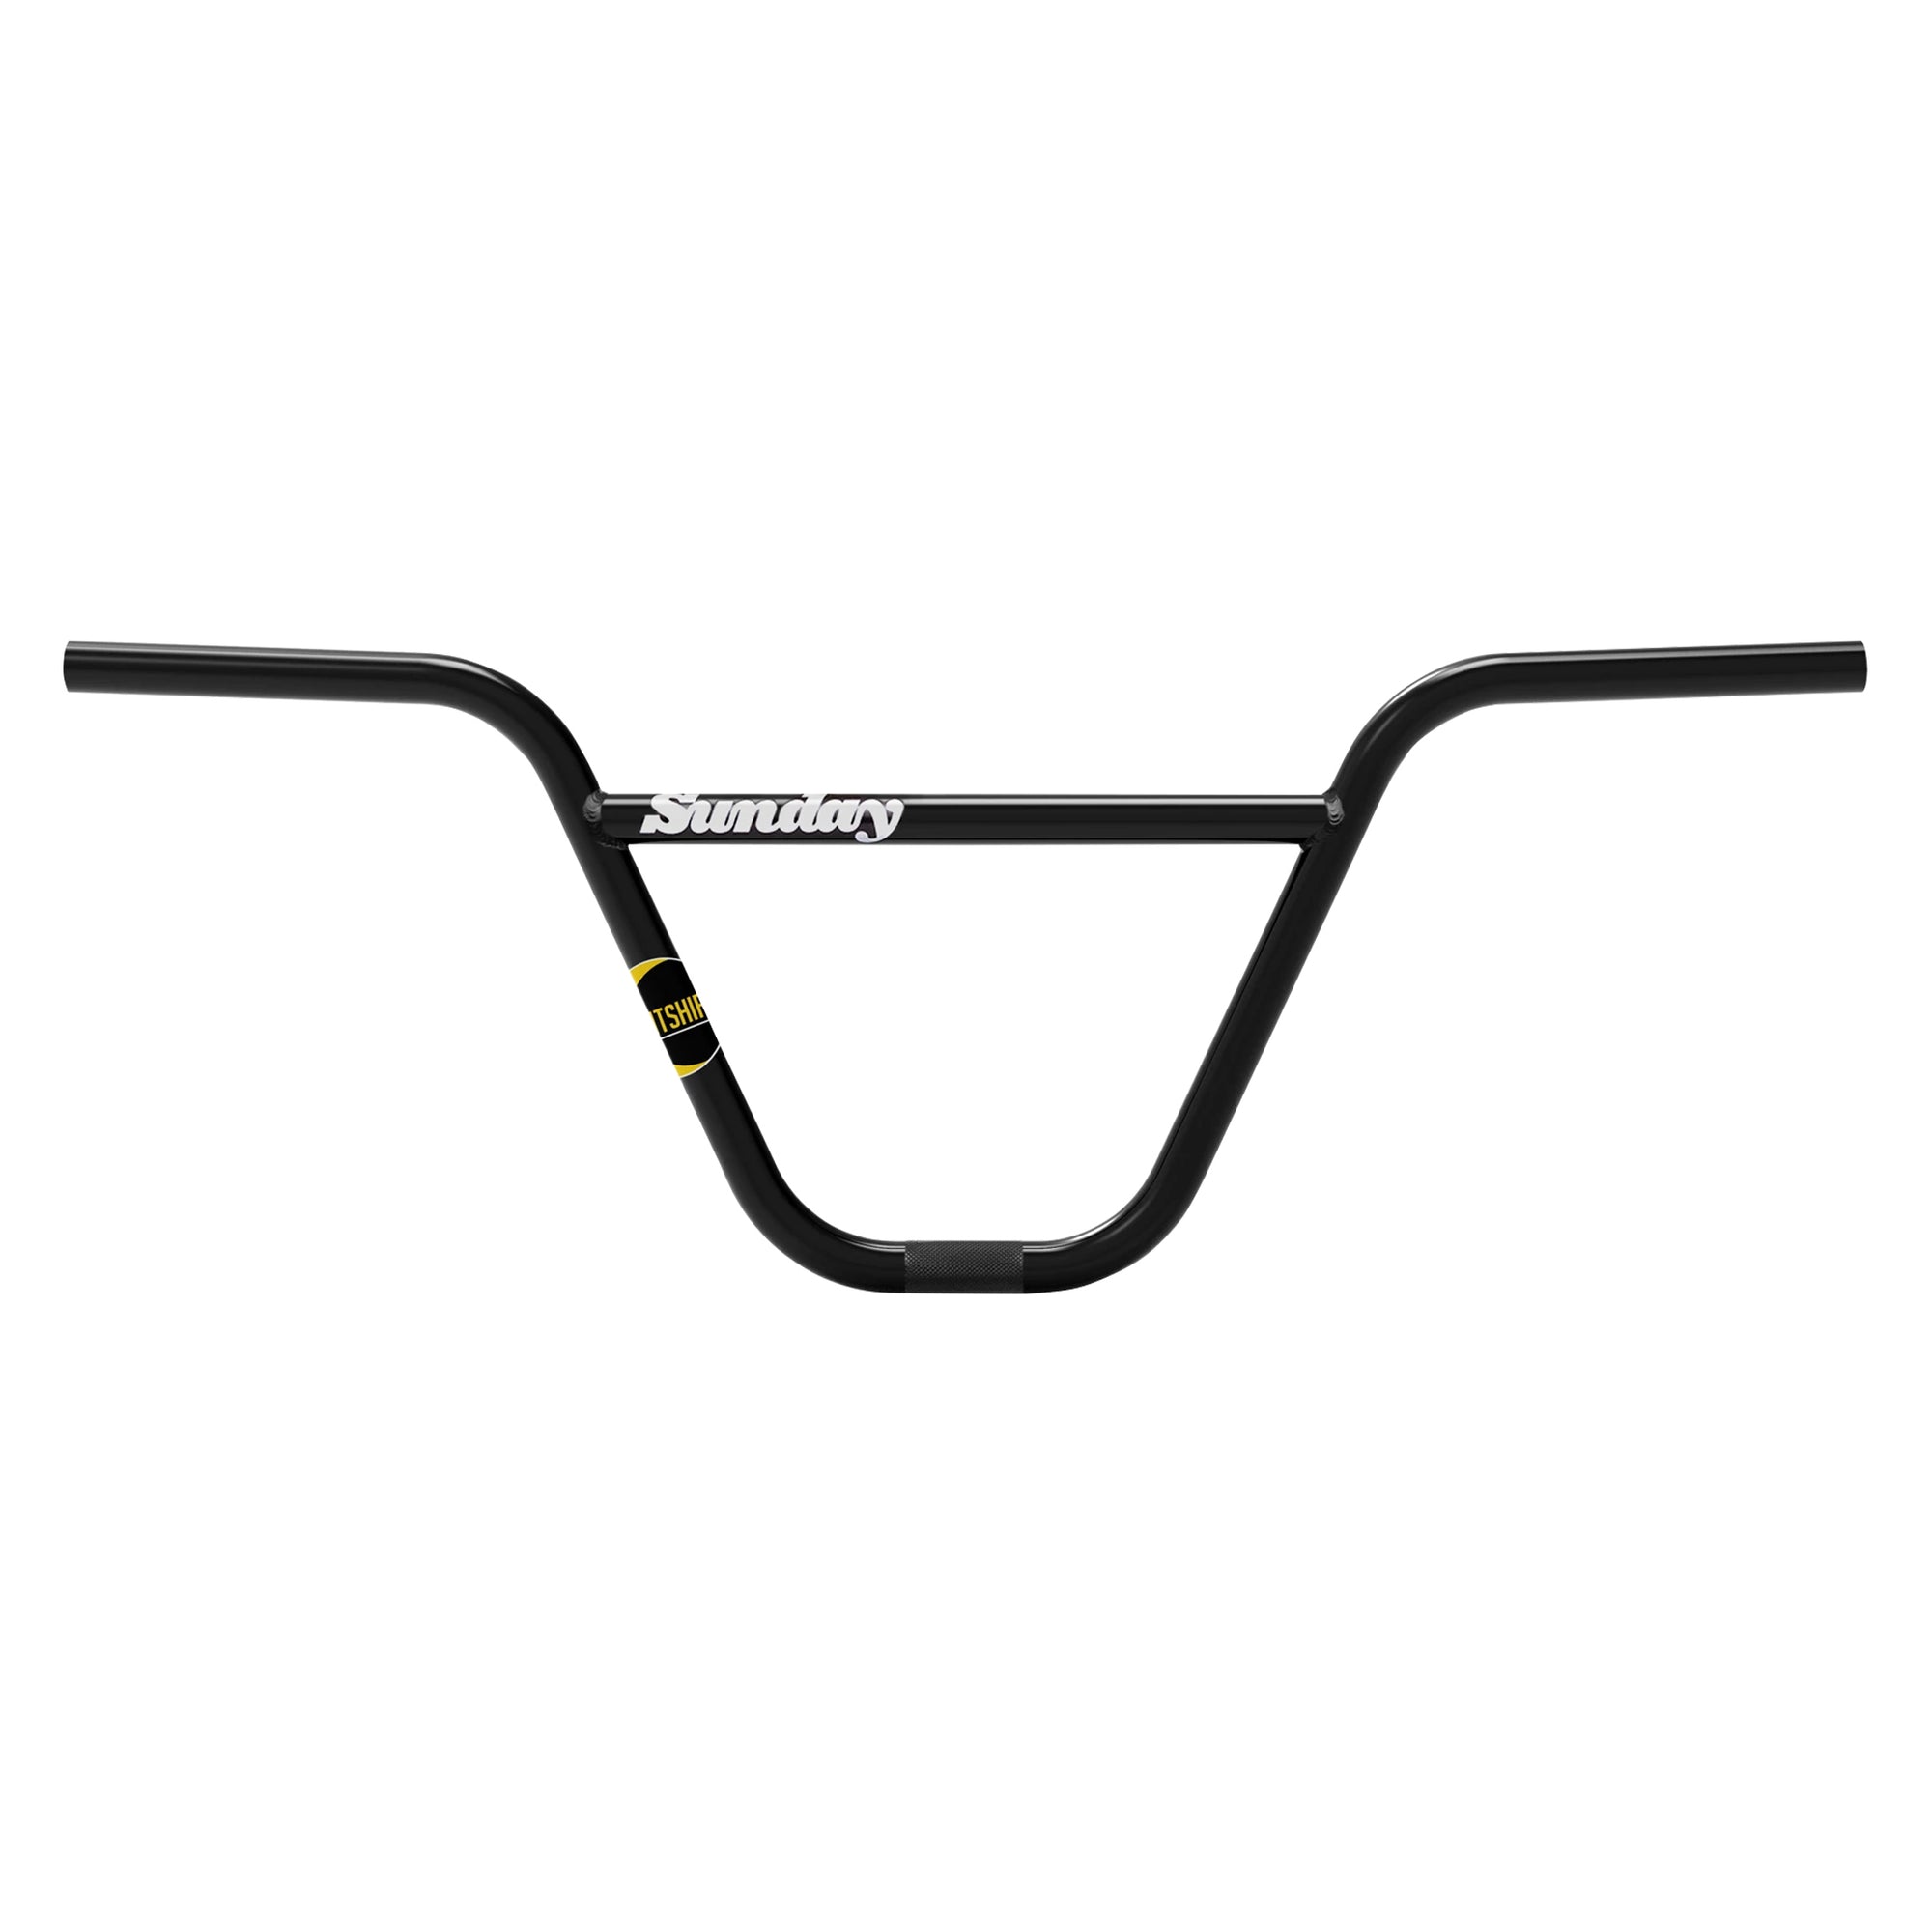 Sunday Nightshift 9.625" Handlebar - Rust Proof Black Or Chrome - Downtown Bicycle Works 